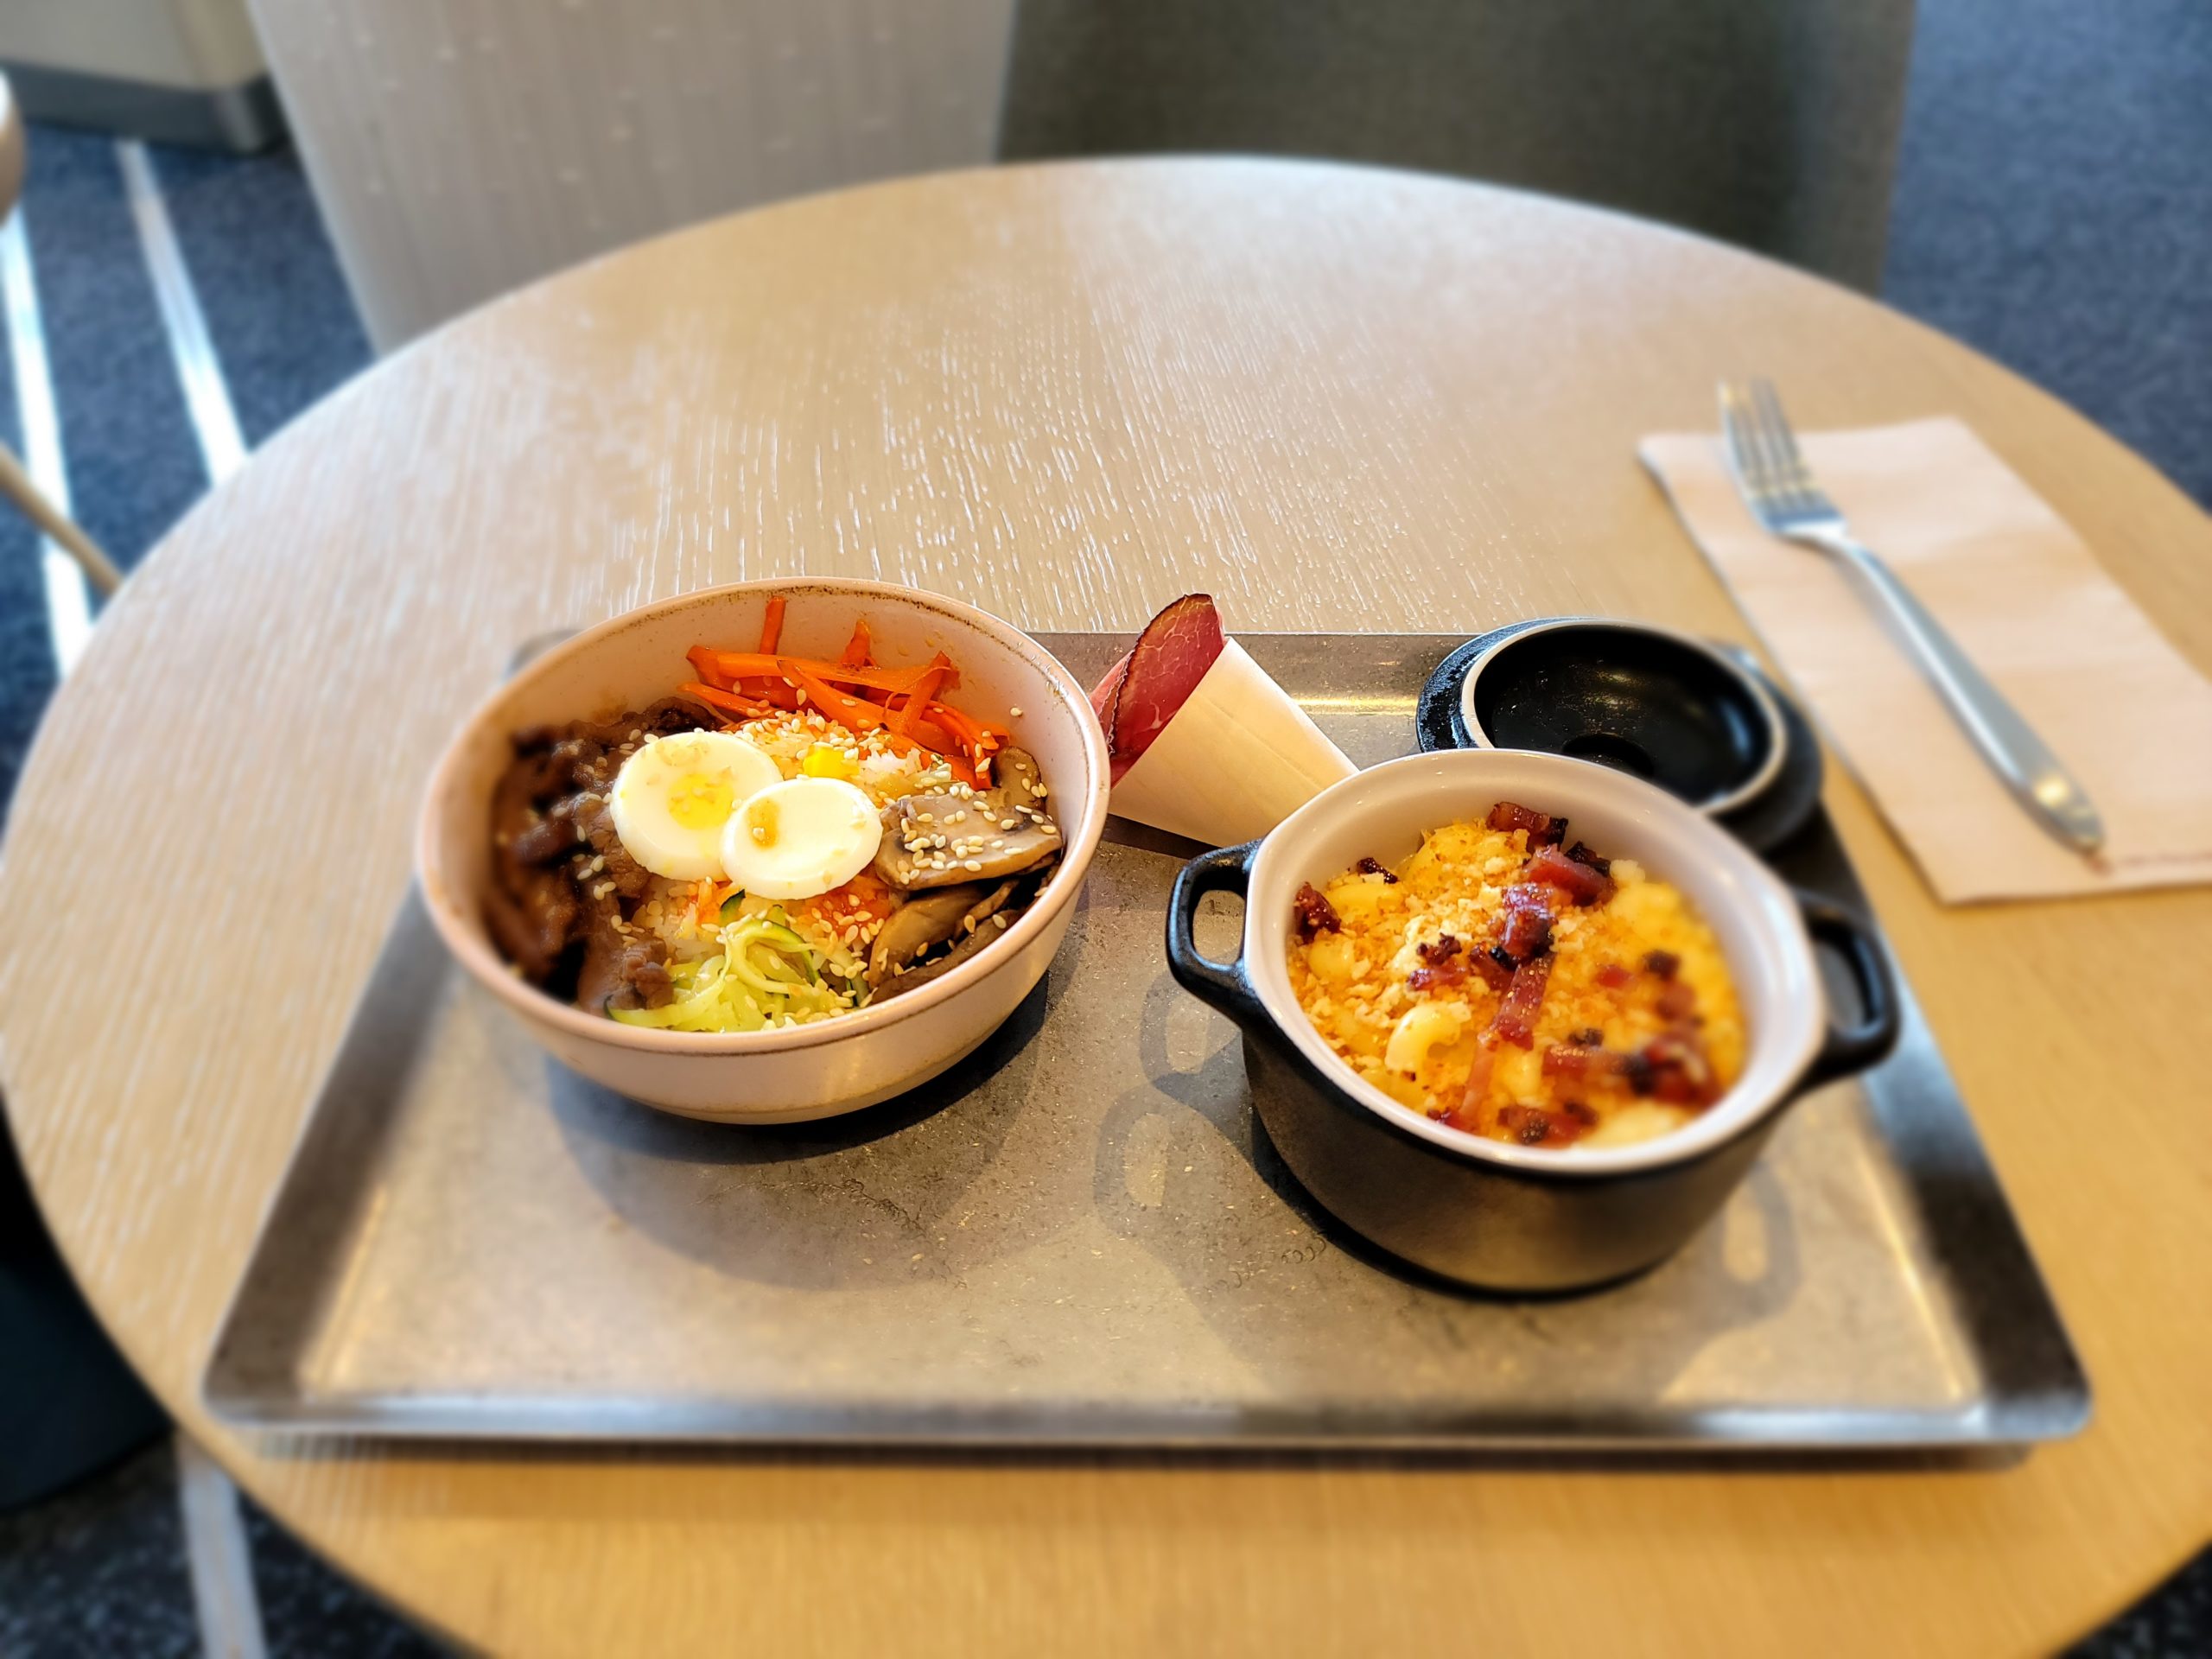 capital one lounge dfw airport bibimbap and mac and cheese